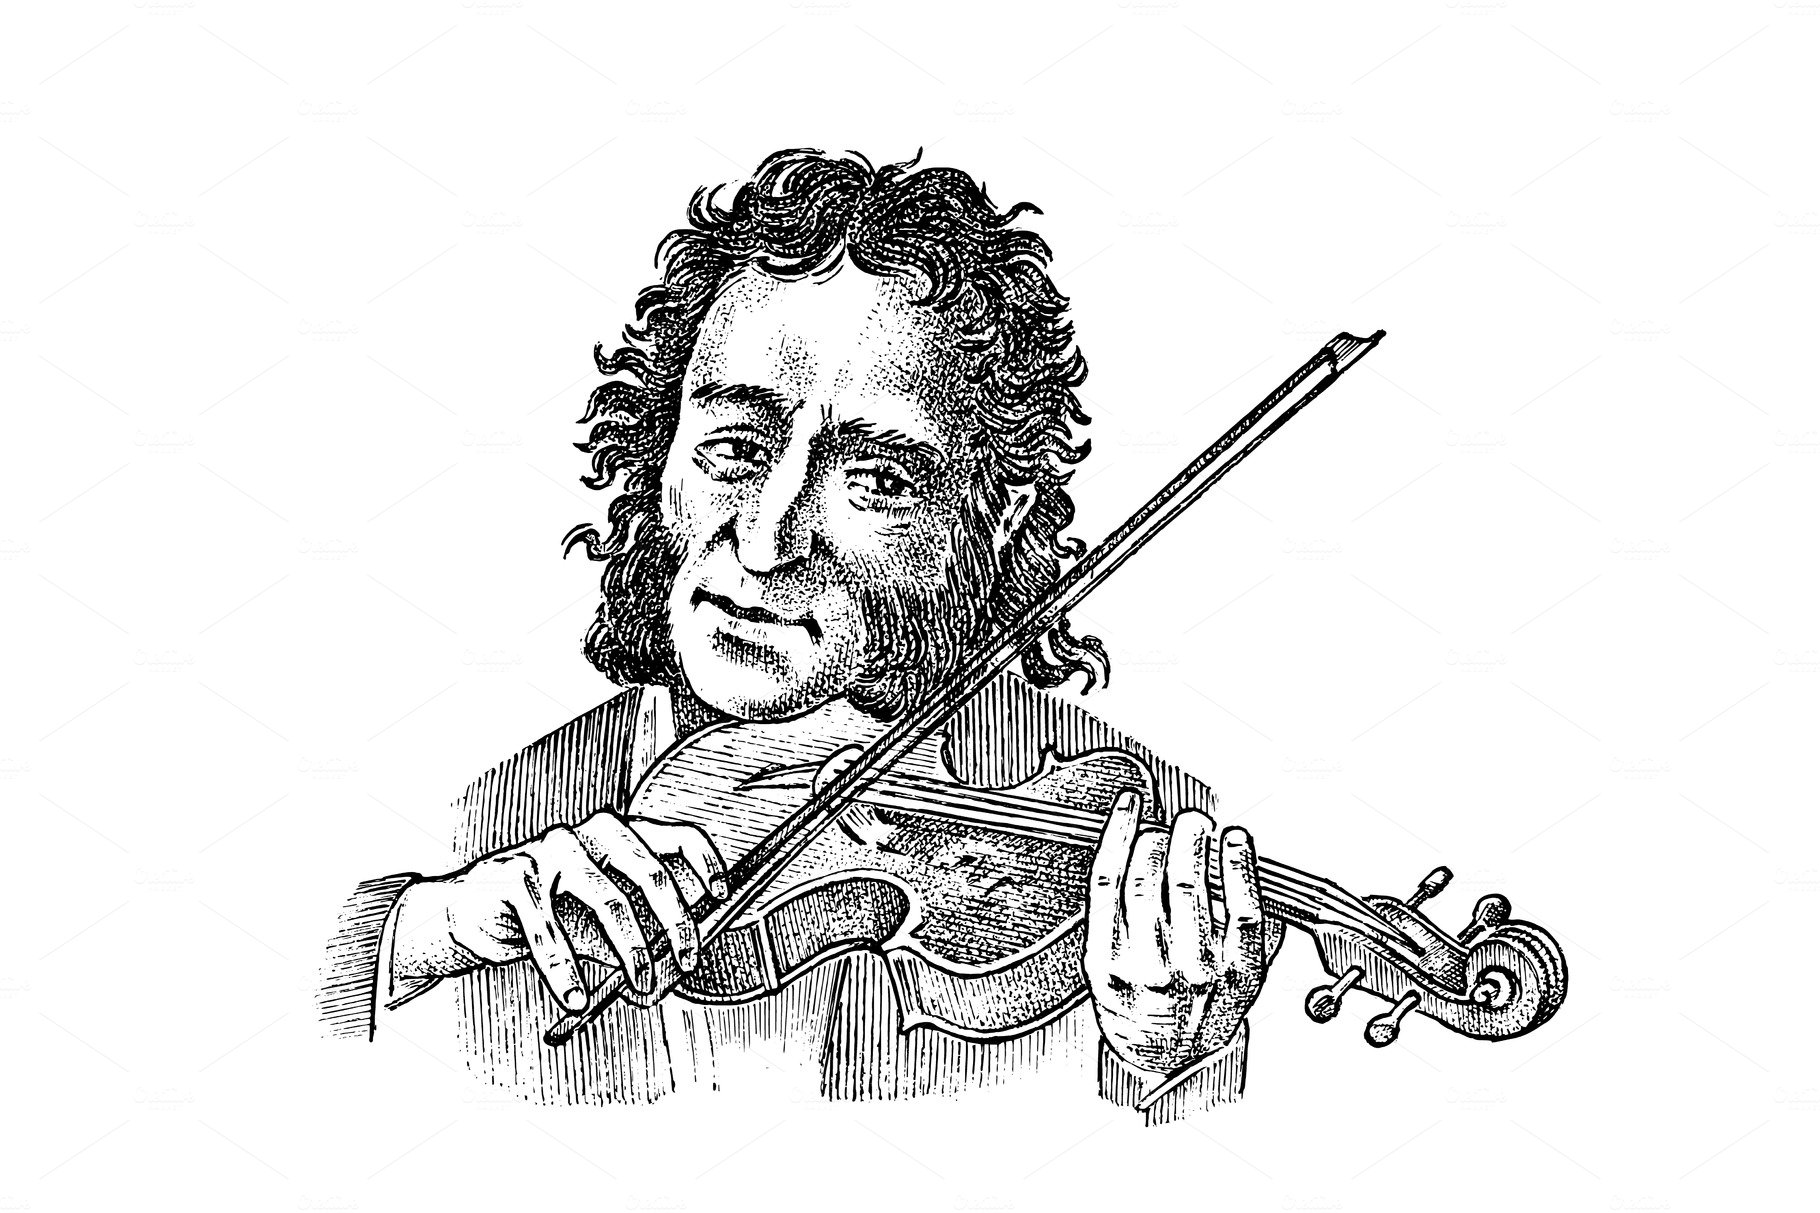 Man plays the violin. Musician cover image.